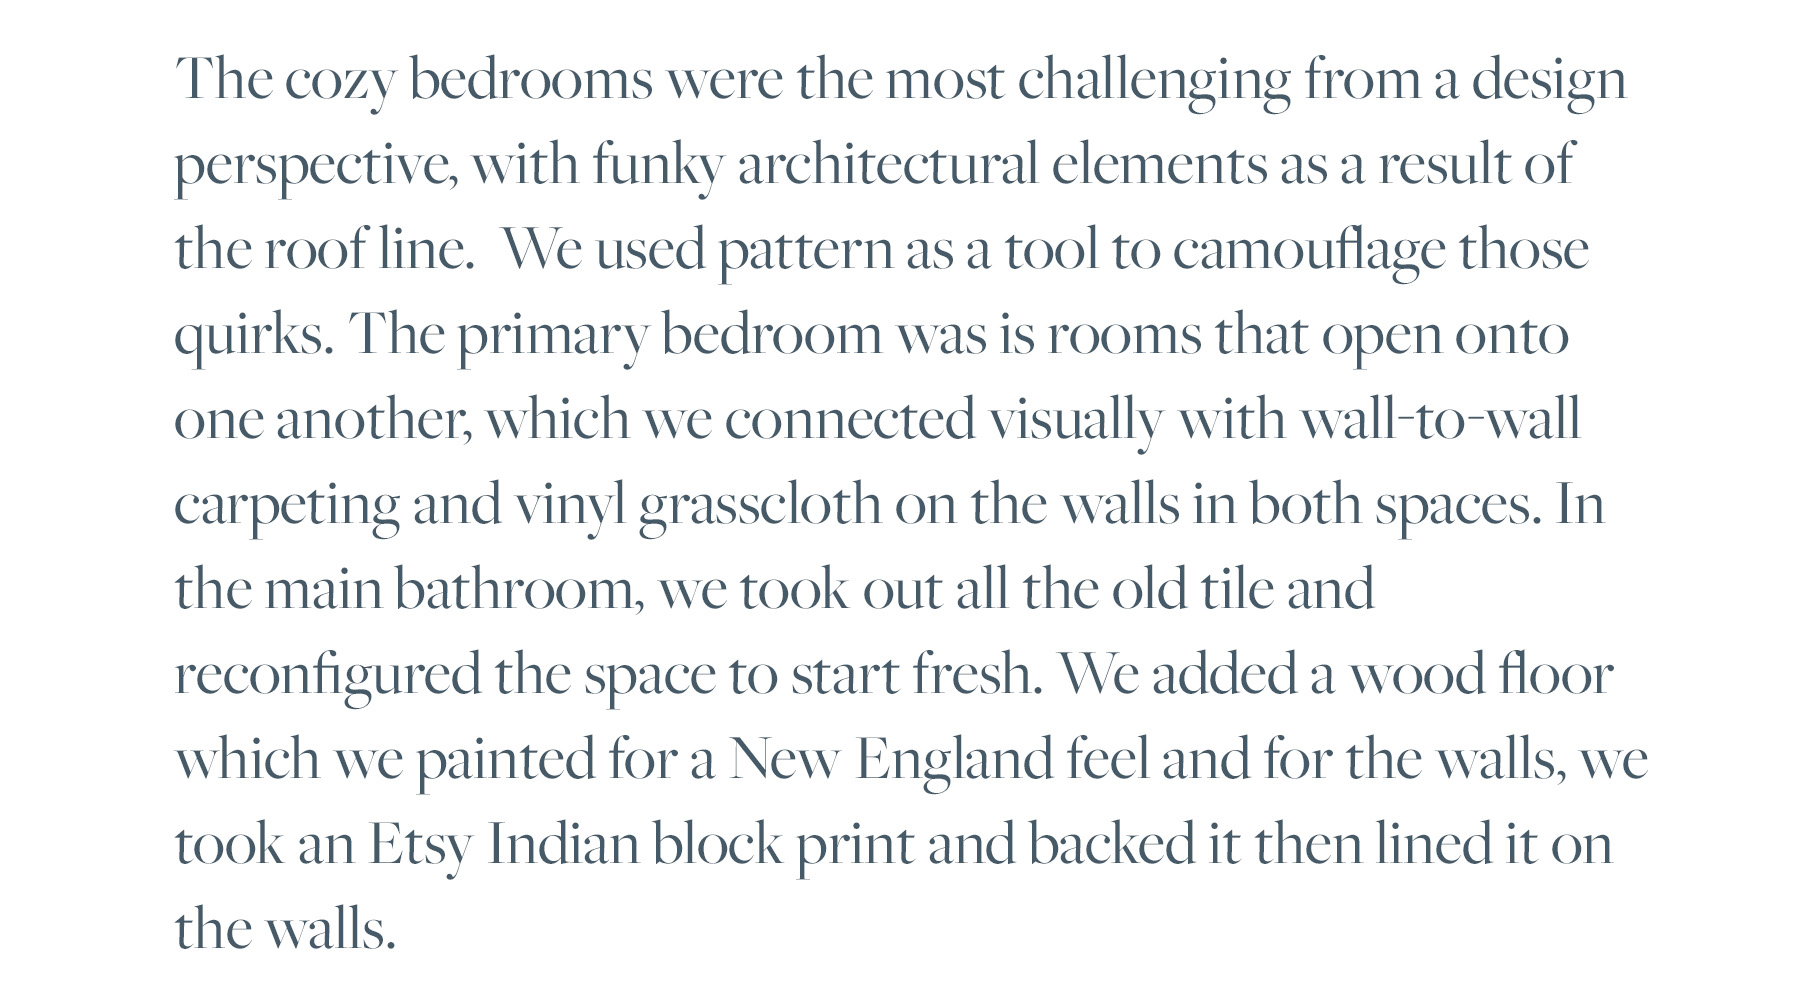 The cozy bedrooms were the most challenging from a design perspective, with funky architectural elements as a result of the roof line. We used pattern as a tool to camouflage those quirks. The primary bedroom was is rooms that open onto one another, which we connected visually with wall-to-wall carpeting and vinyl grasscloth on the walls in both spaces. In the main bathroom, we took out all the old tile and reconfigured the space to start fresh. We added a wood floor which we painted for a New England feel and for the walls, we took an Etsy Indian block print and backed it then lined it on the walls. 